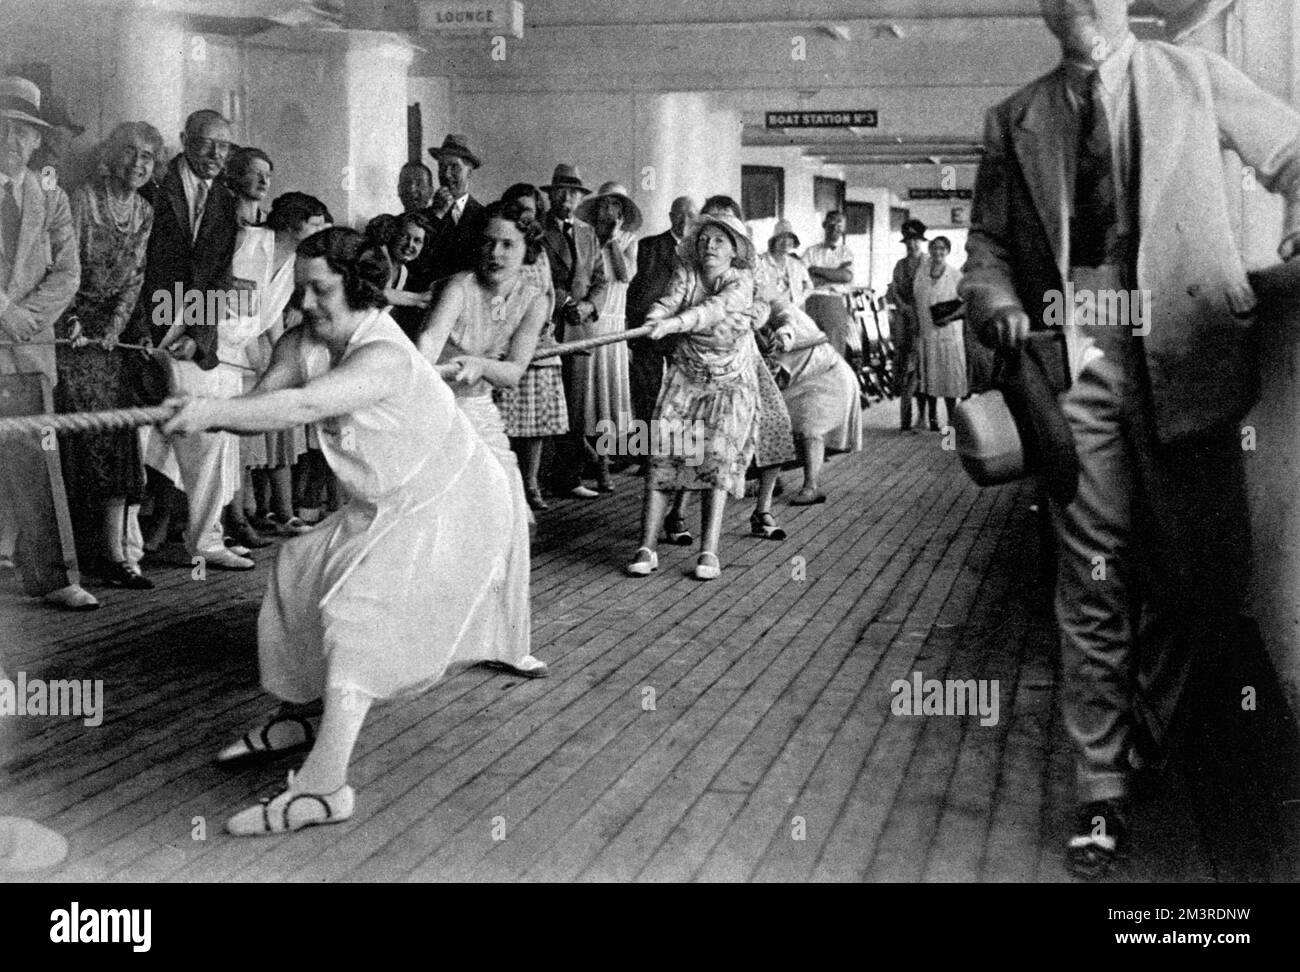 A married versus single tug o' war match on board the R.S.M.P. Atlantis.  The Hon. Mrs Geoffrey Borwick and Lady Moira Combe (nearest the camera) pulling, while the Earl and Countess of Stradbroke (left, hatless) watch proceedings.     Date: 1931 Stock Photo